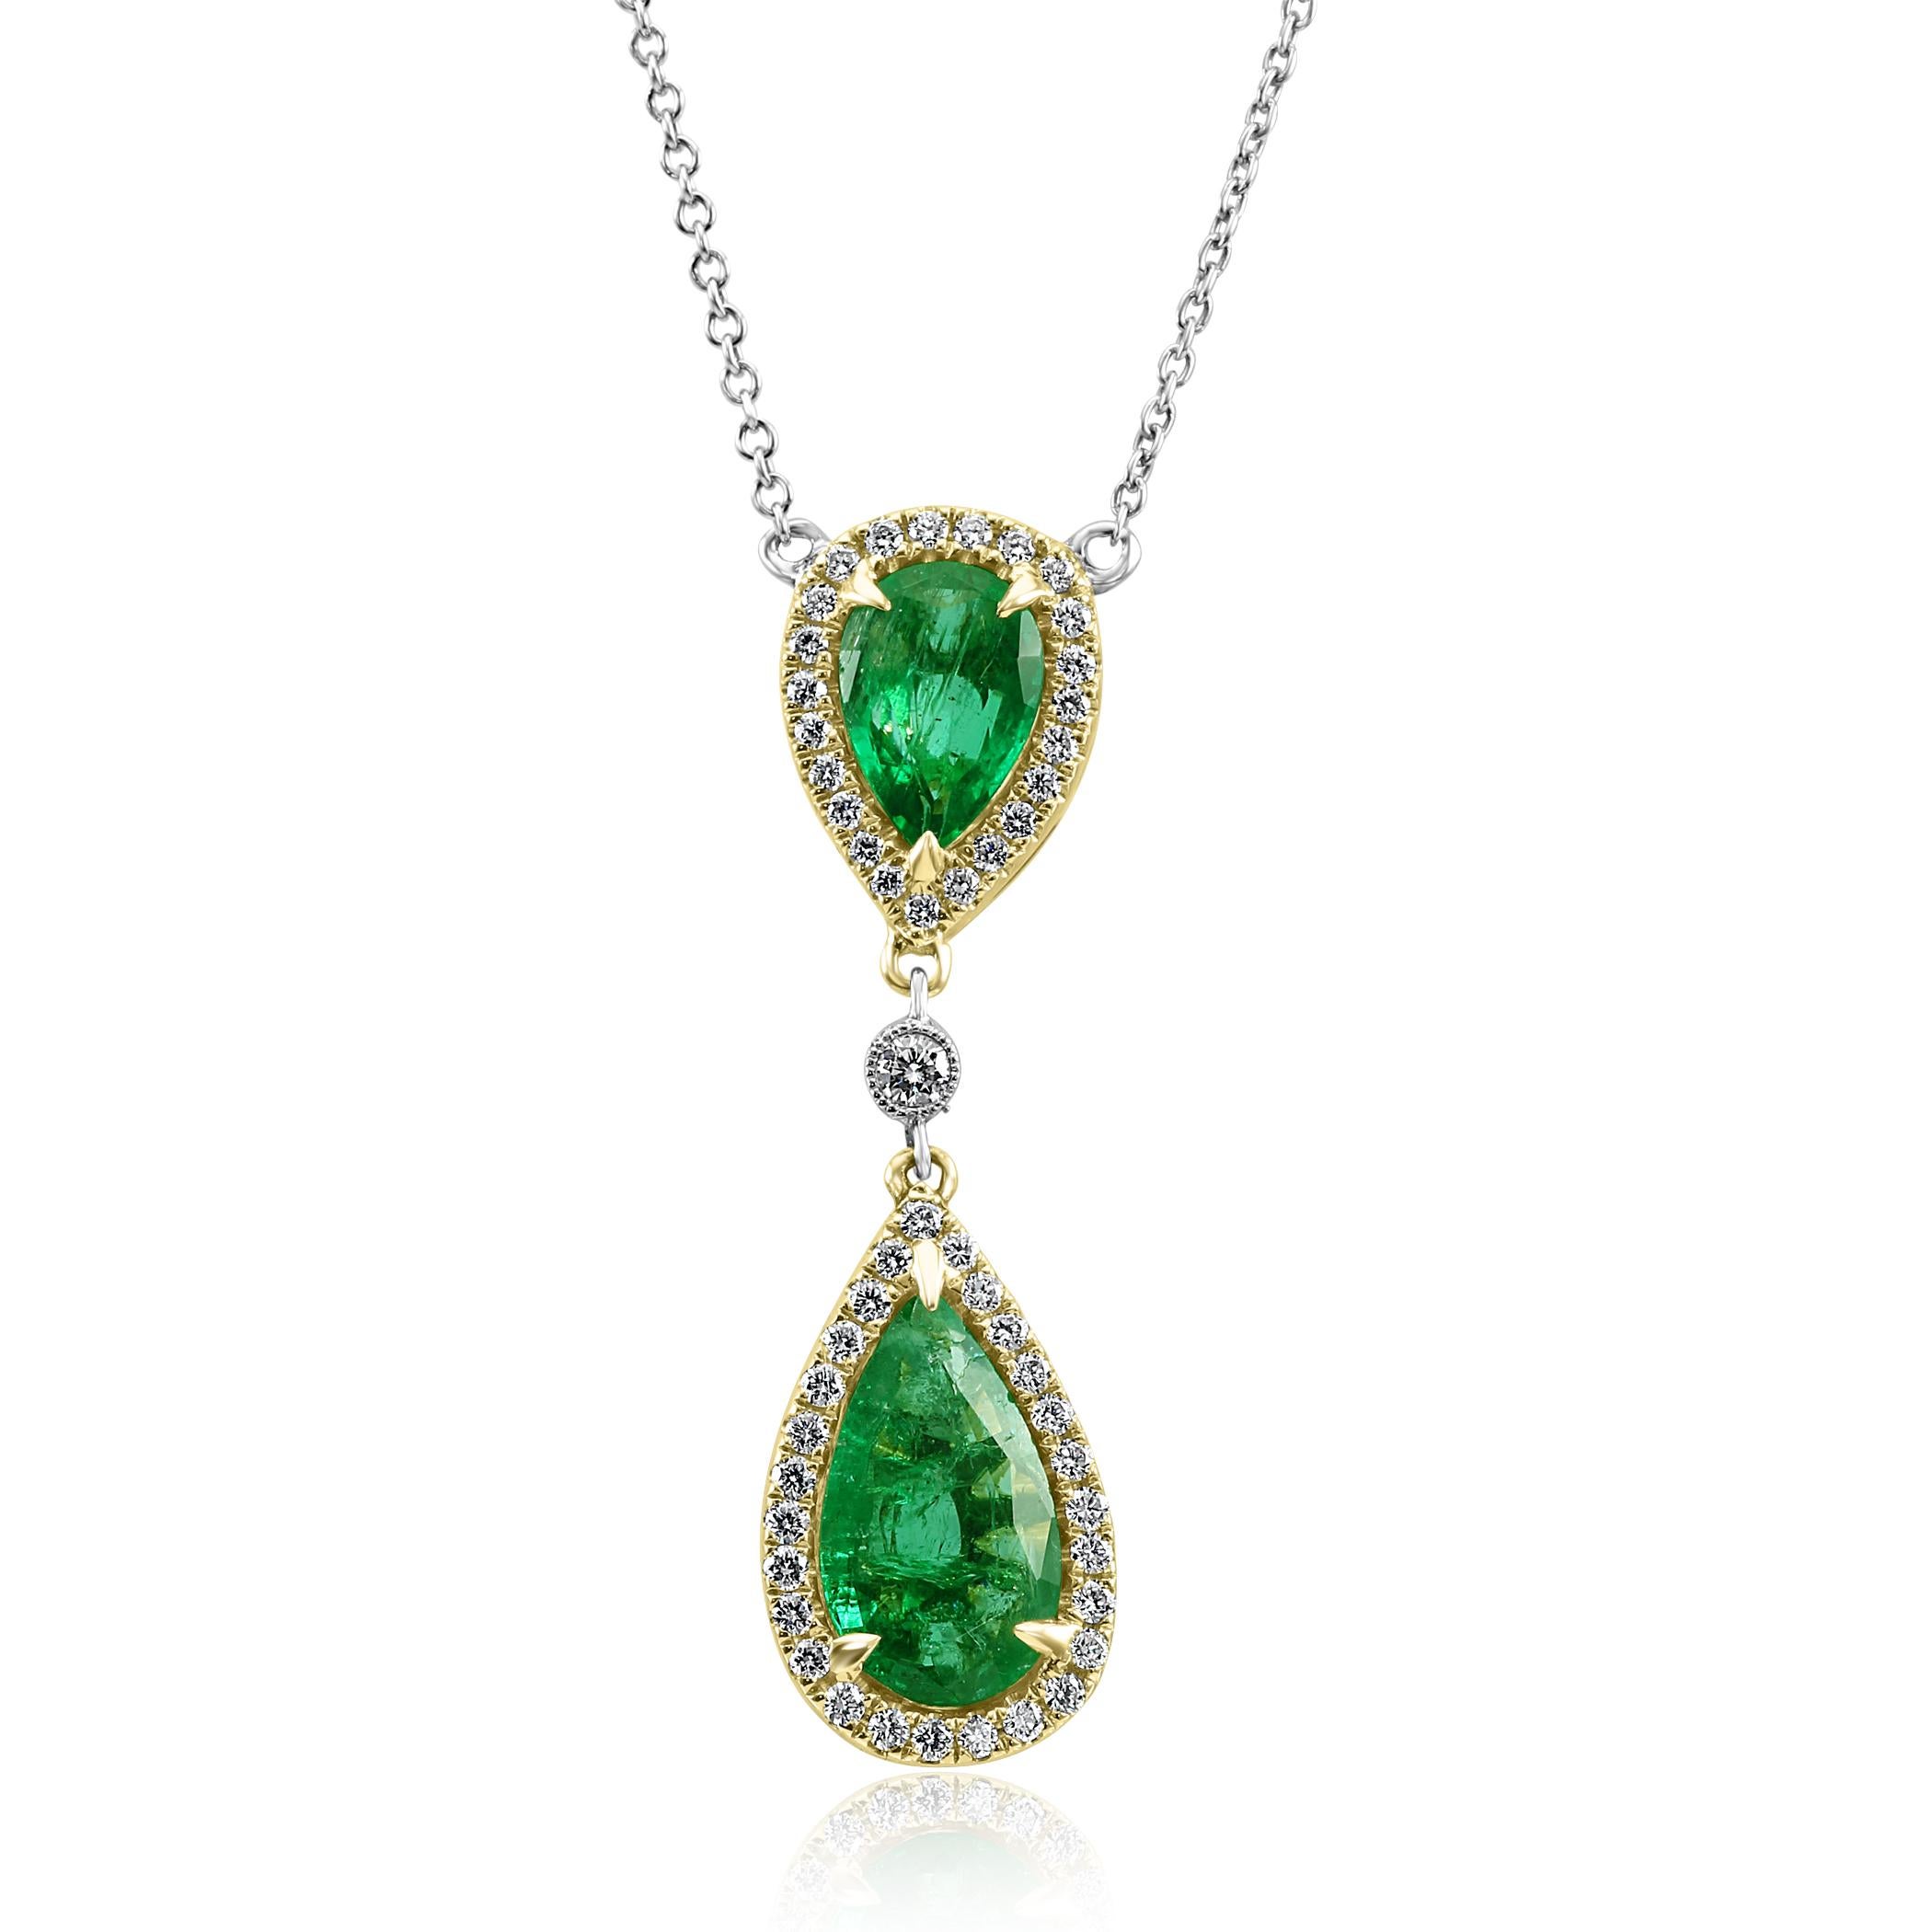 Stunning 2 Natural Zambian Emerald Pears 3.54 Carat Encircled in Double Halo of White G-H Color VS-SI Clarity Diamond Rounds 0.90 Carat in 14K White and Yellow Gold Drop Pendant Diamond By Yard Chain Chic and Stylish Necklace.

Total Weight 4.44